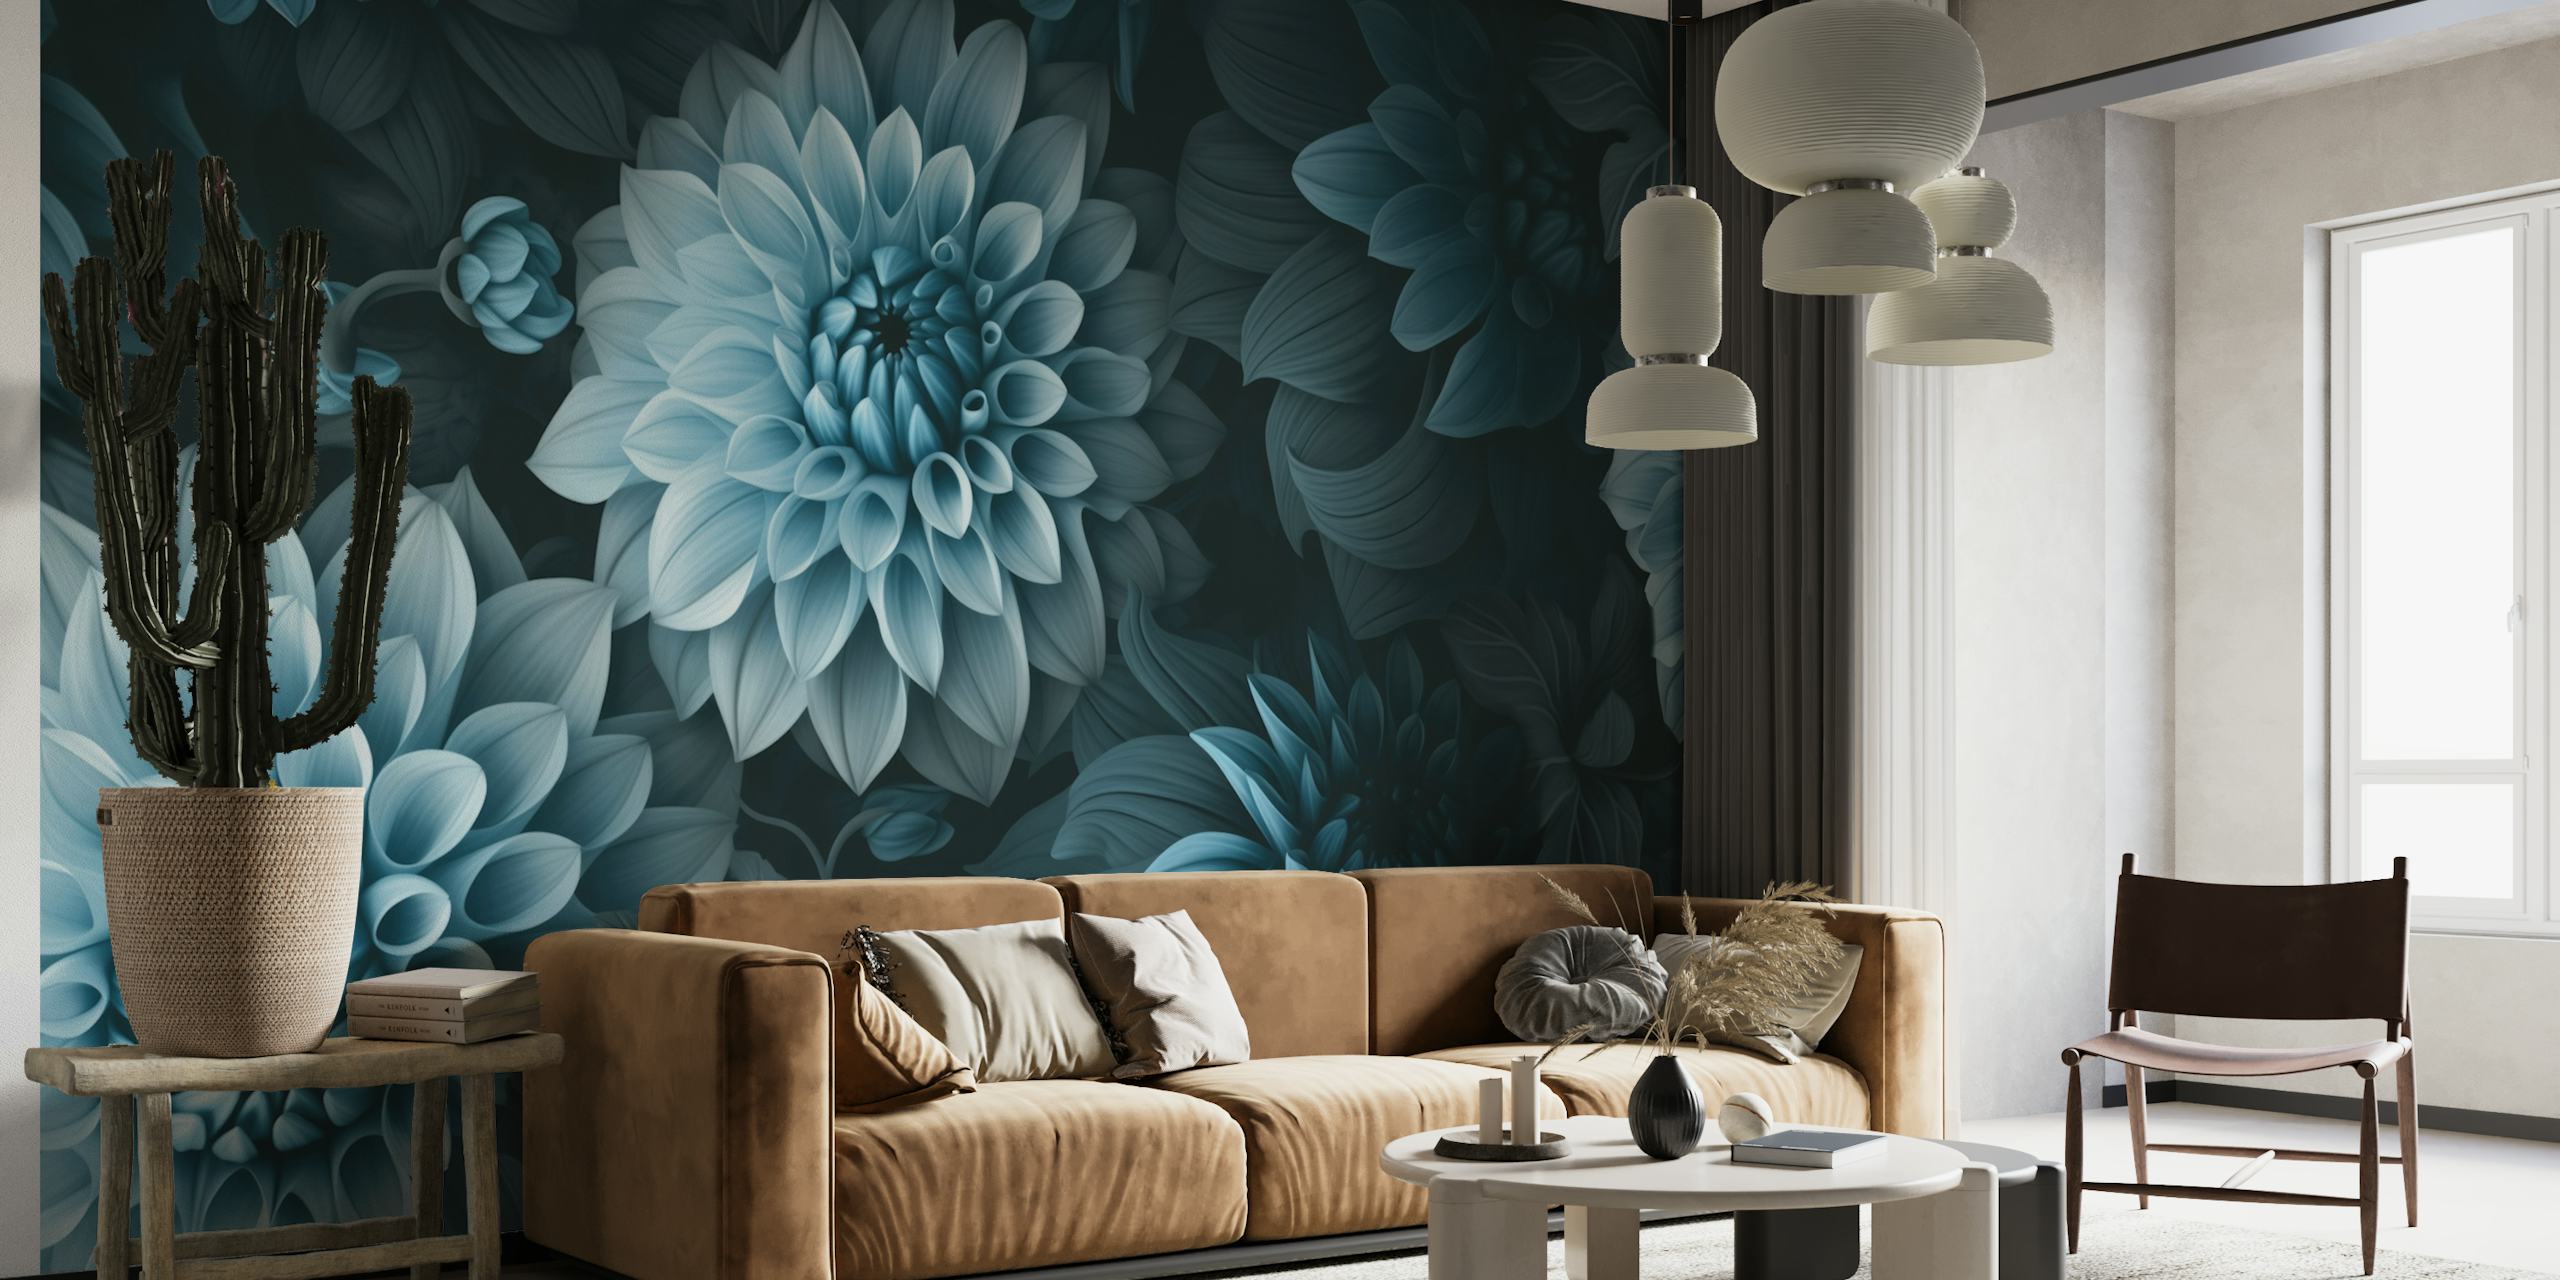 Opulent Moody Dahlia Flowers wall mural with rich teal and blue shades